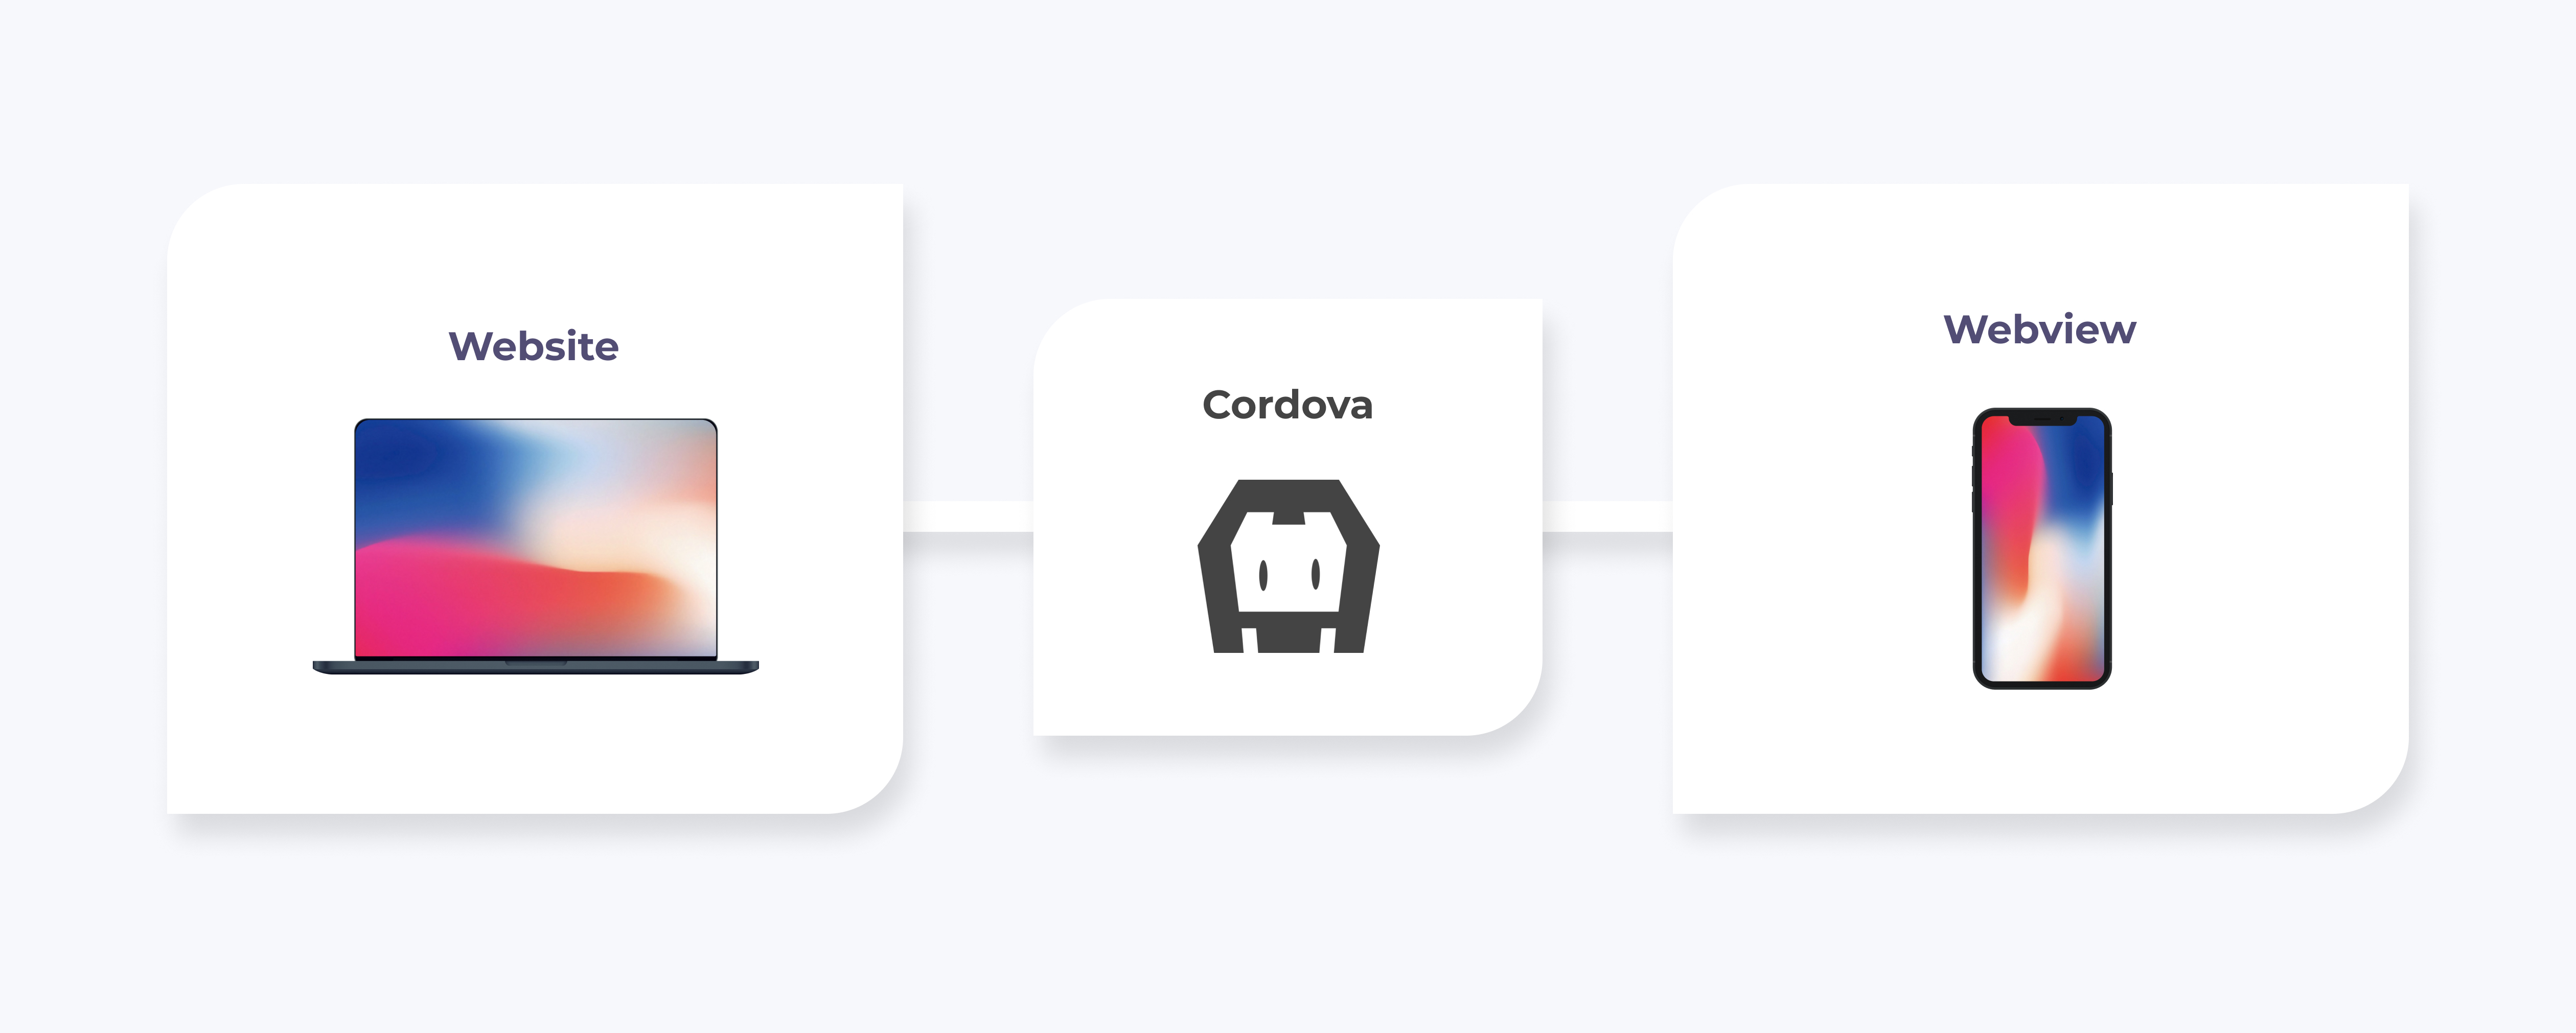 Nightborn - Tools like Cordova allow a website to be installed on users' devices